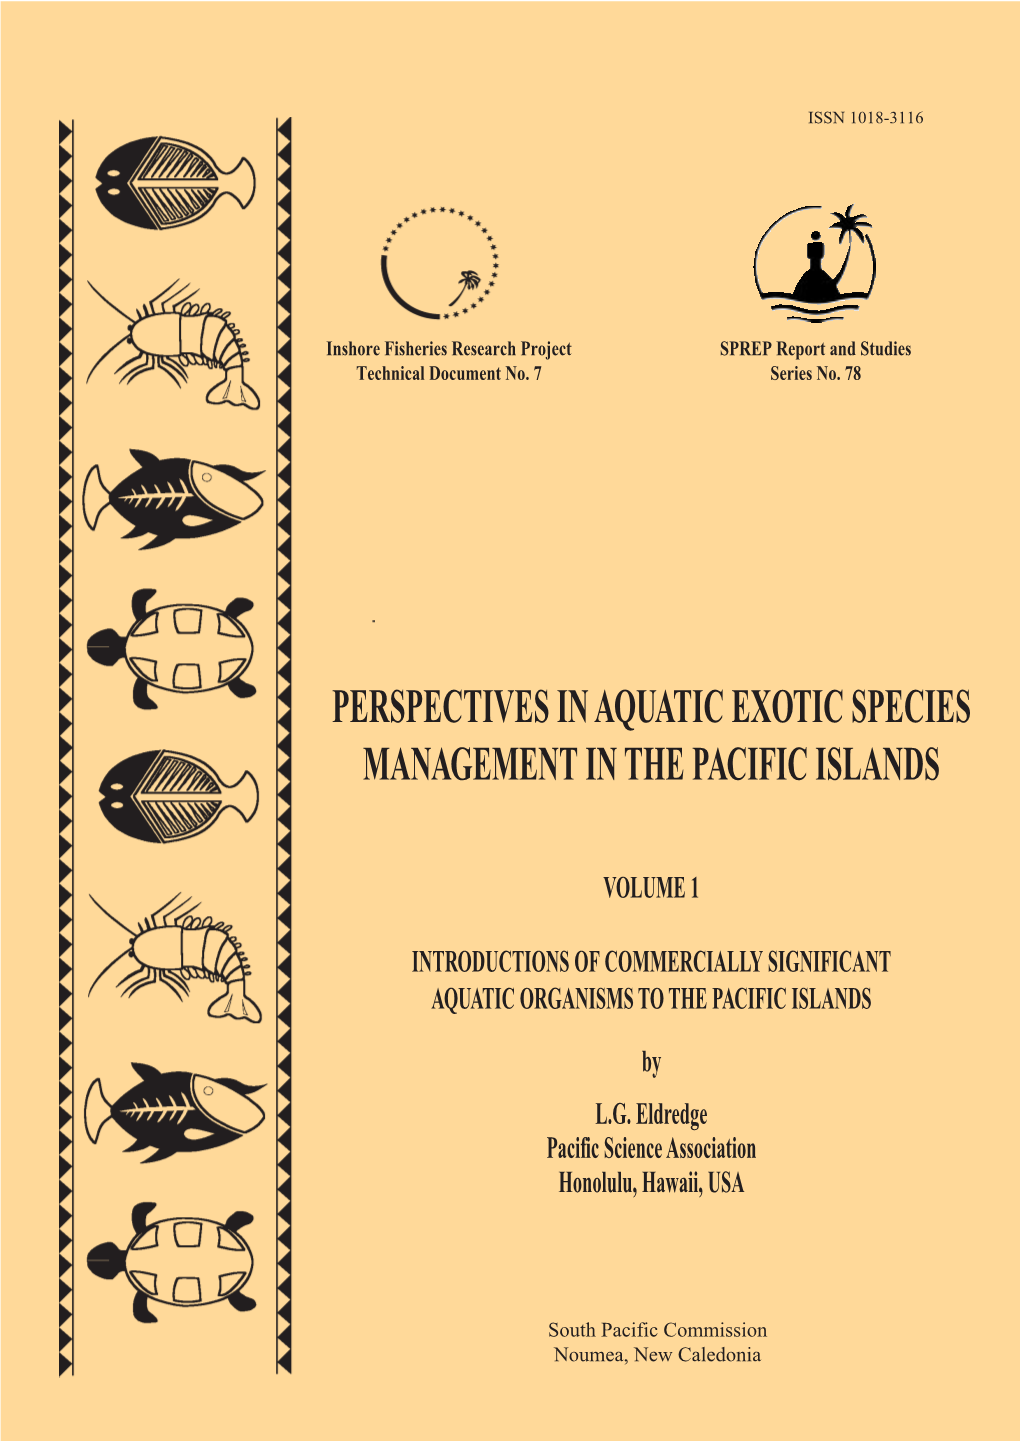 Perspectives in Aquatic Exotic Species Management in the Pacific Islands